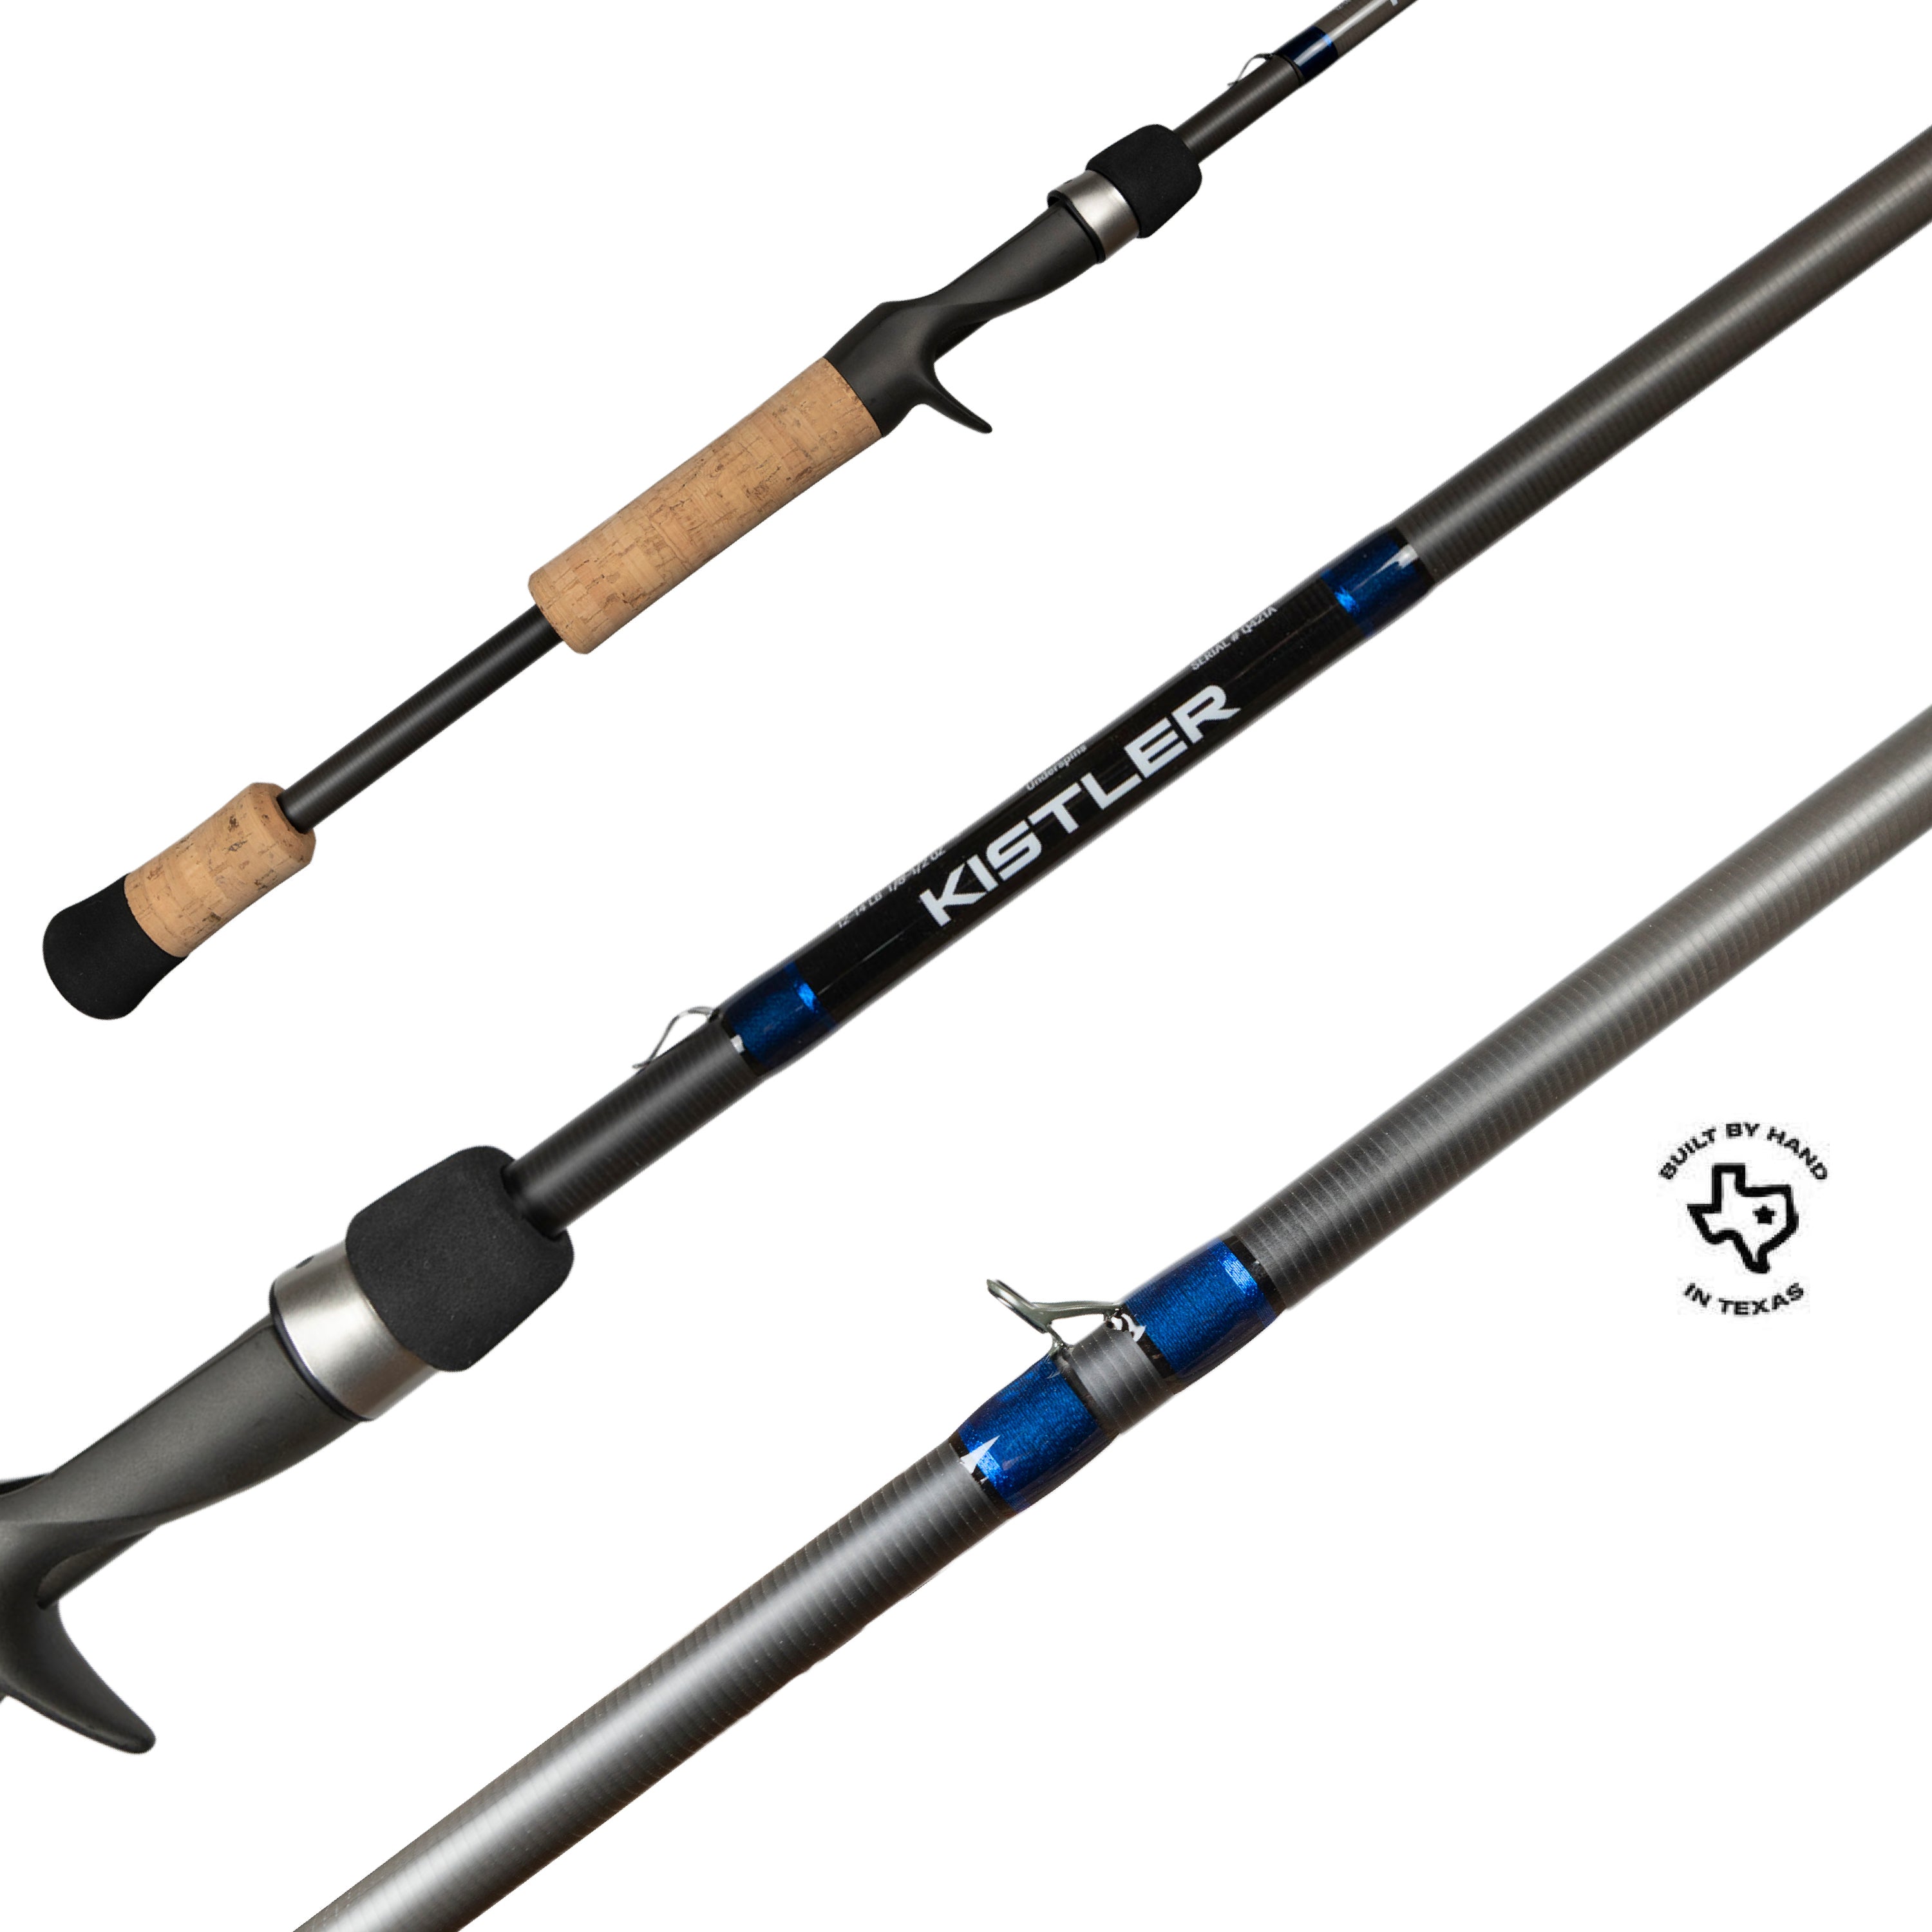 Shimano launches its new SLX rod series to keep with its can't